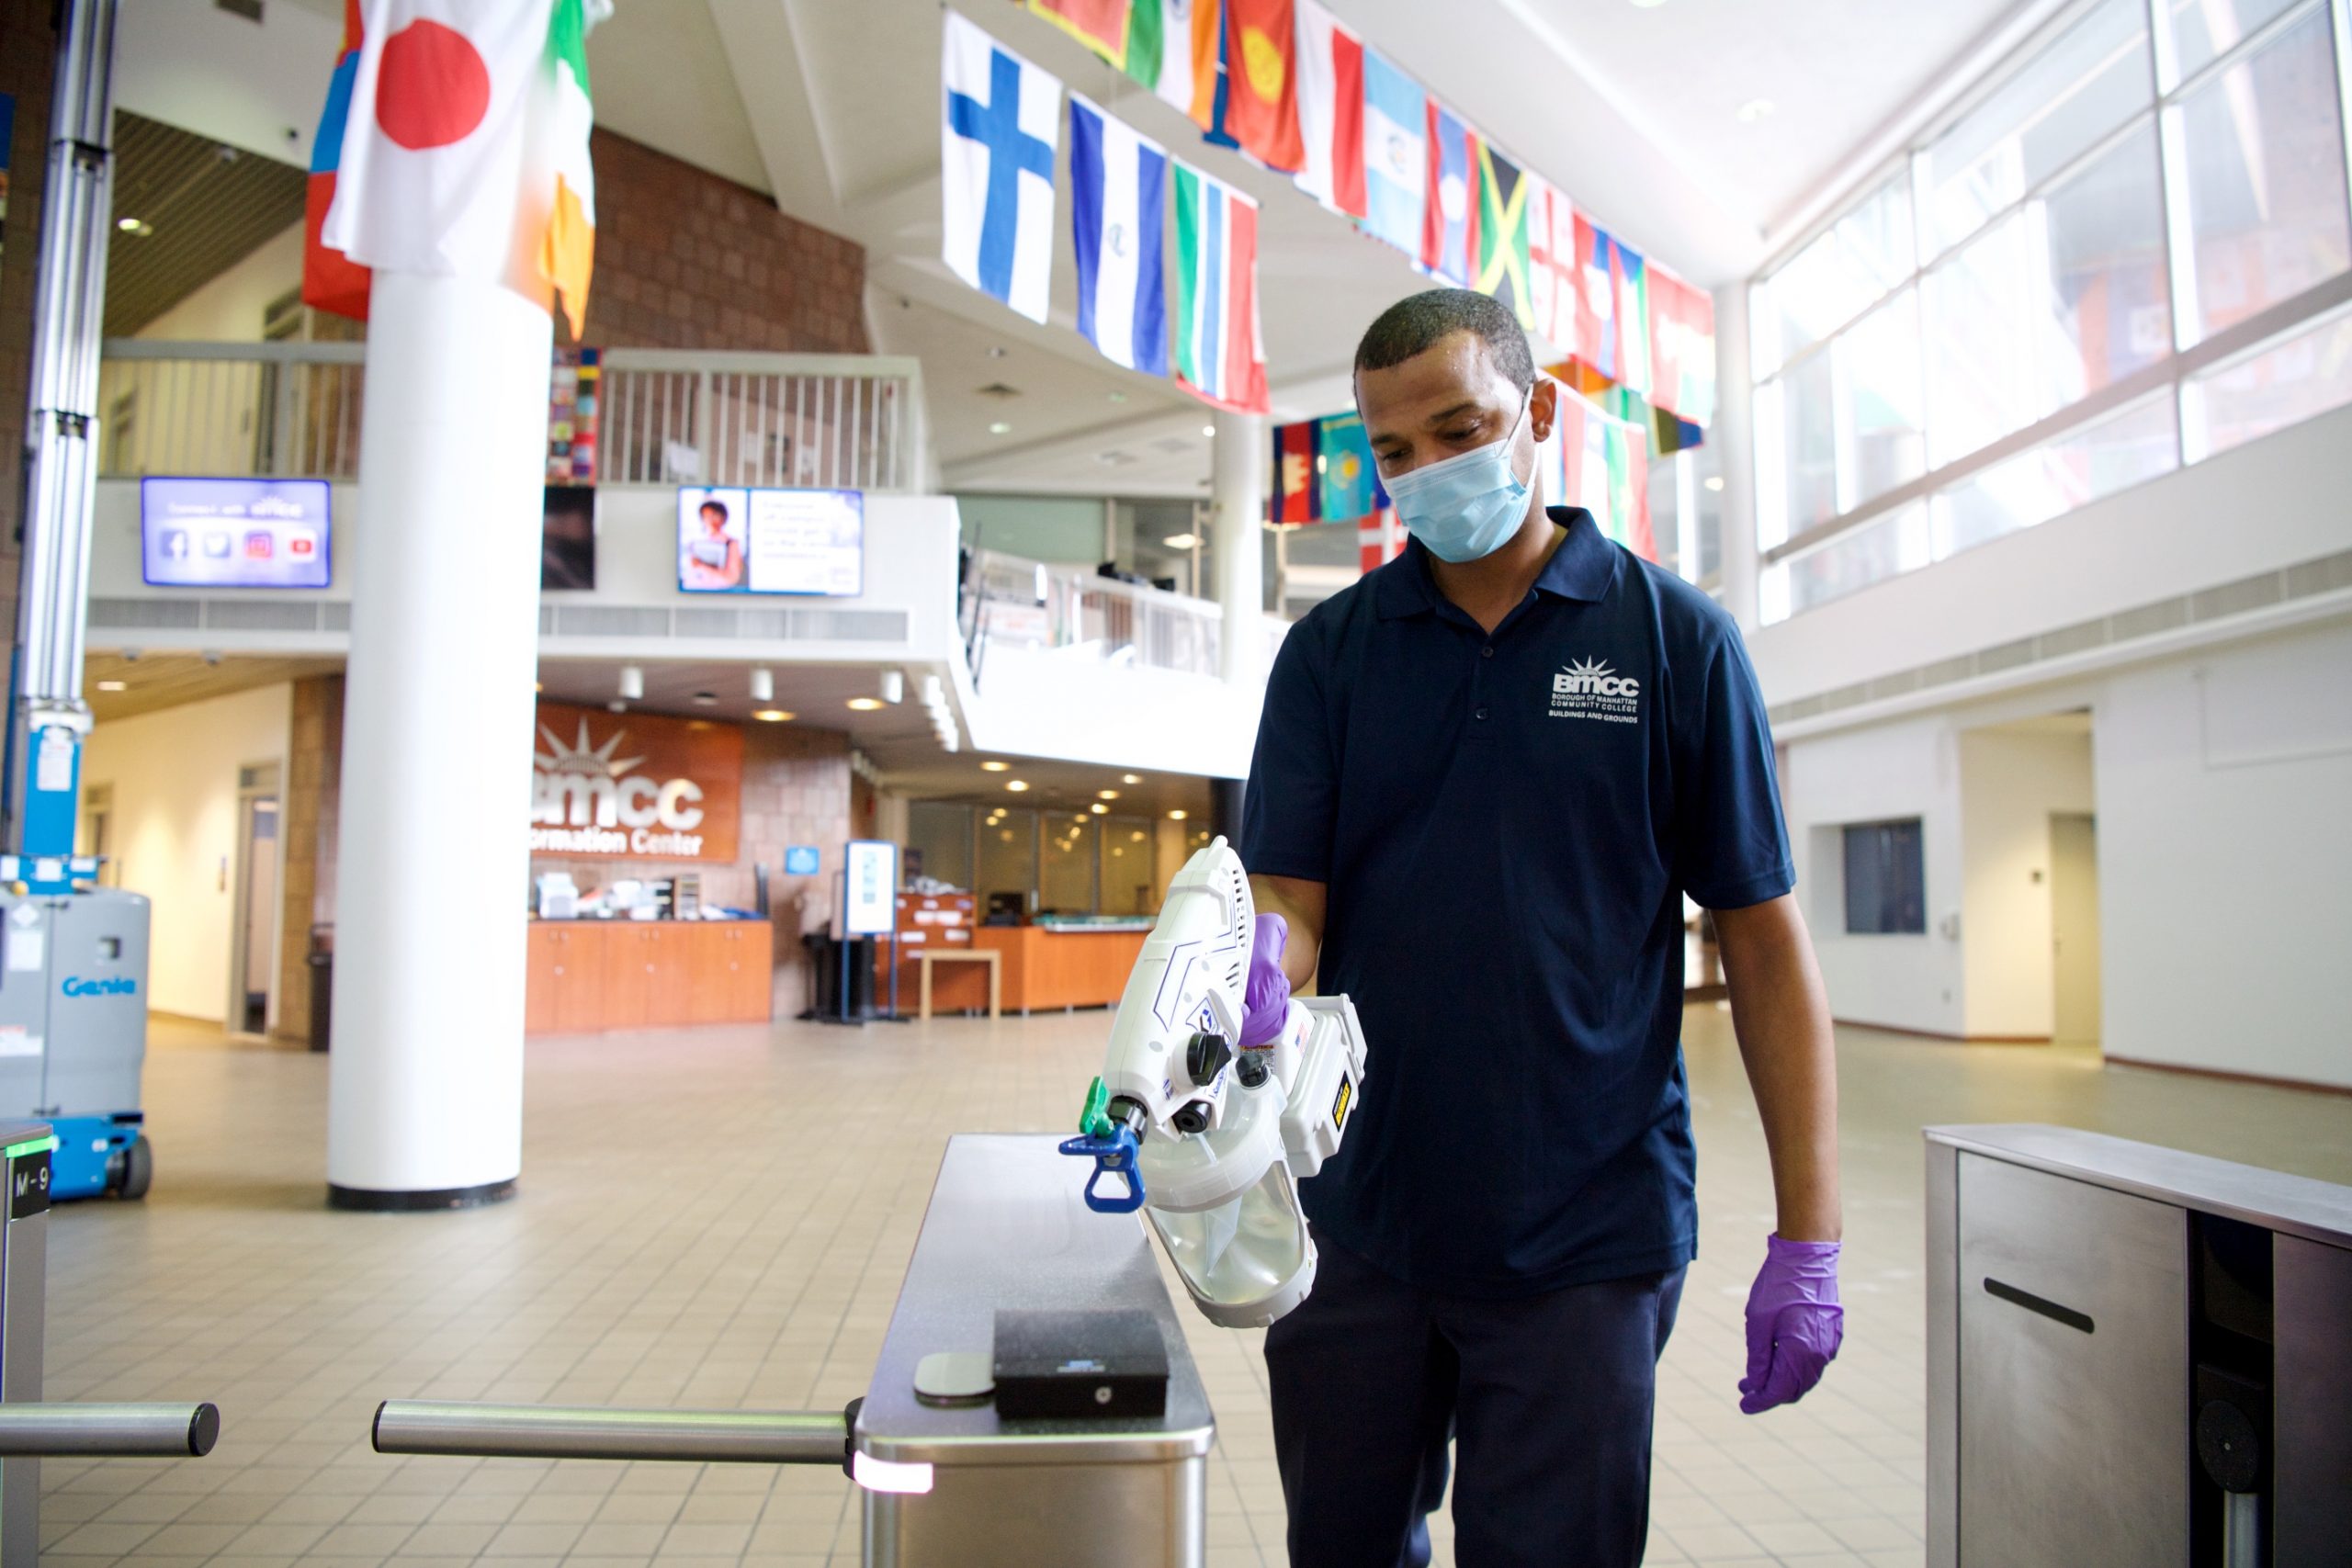 An essential worker enacts safety protocols at a BMCC entrance.